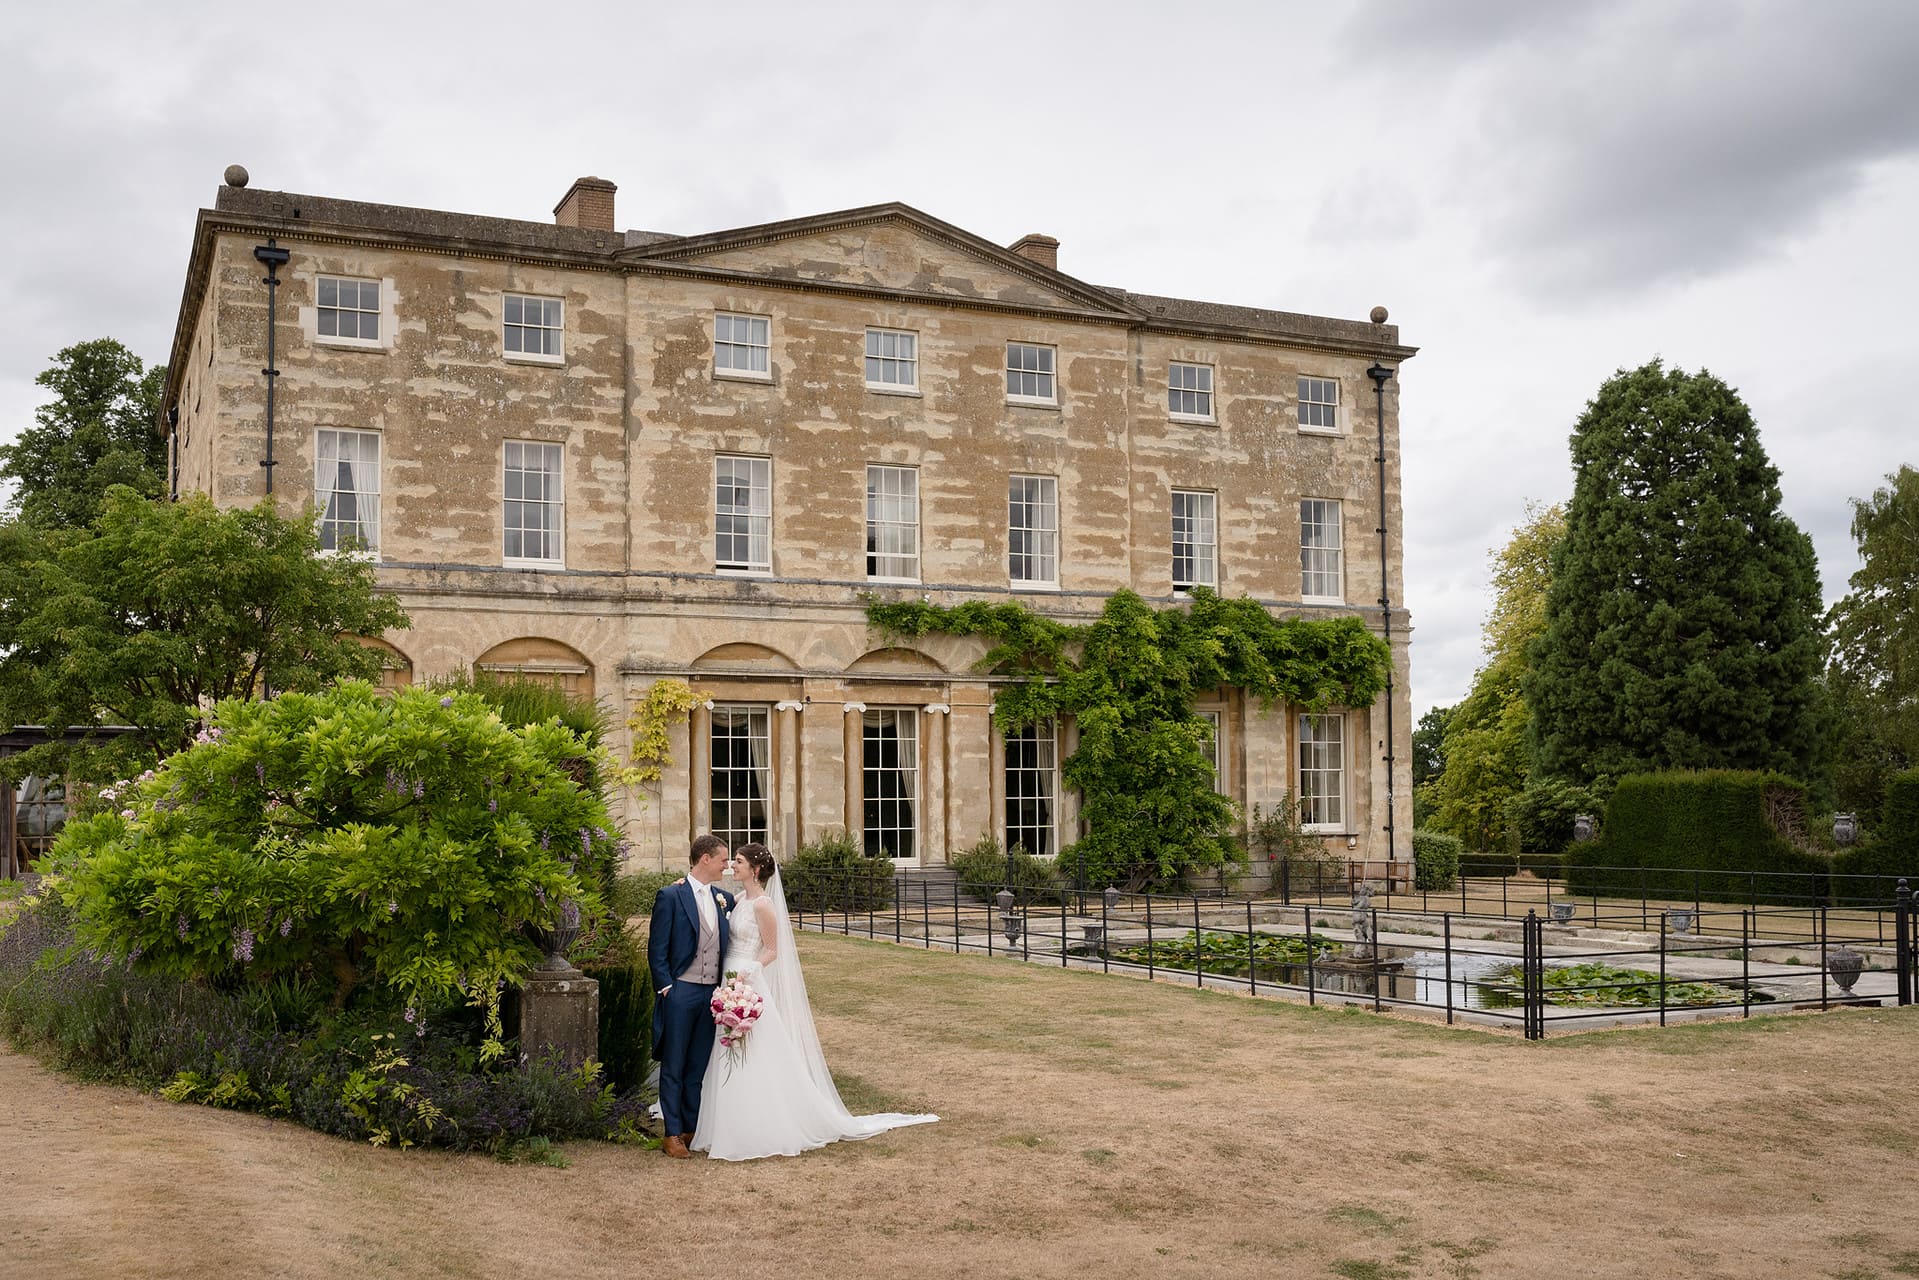 Bride and groom posing for a photo with Courteenhall house behind them